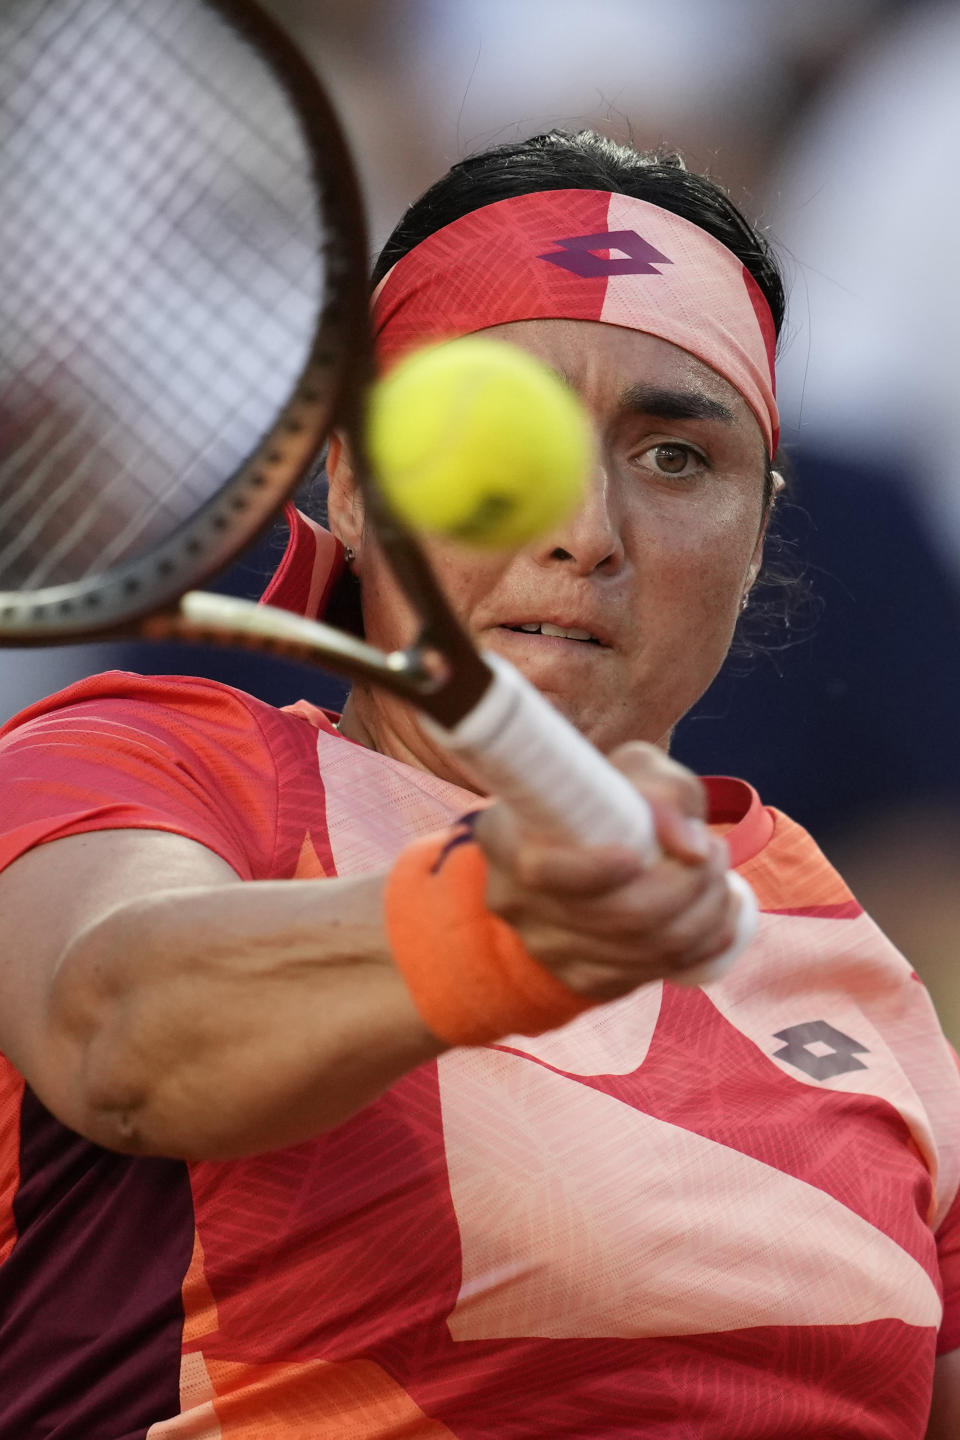 Tunisia's Ons Jabeur returns the ball to Serbia's Olga Danilovic during their third round match of the French Open tennis tournament at the Roland Garros stadium in Paris, Saturday, June 3, 2023. (AP Photo/Christophe Ena)